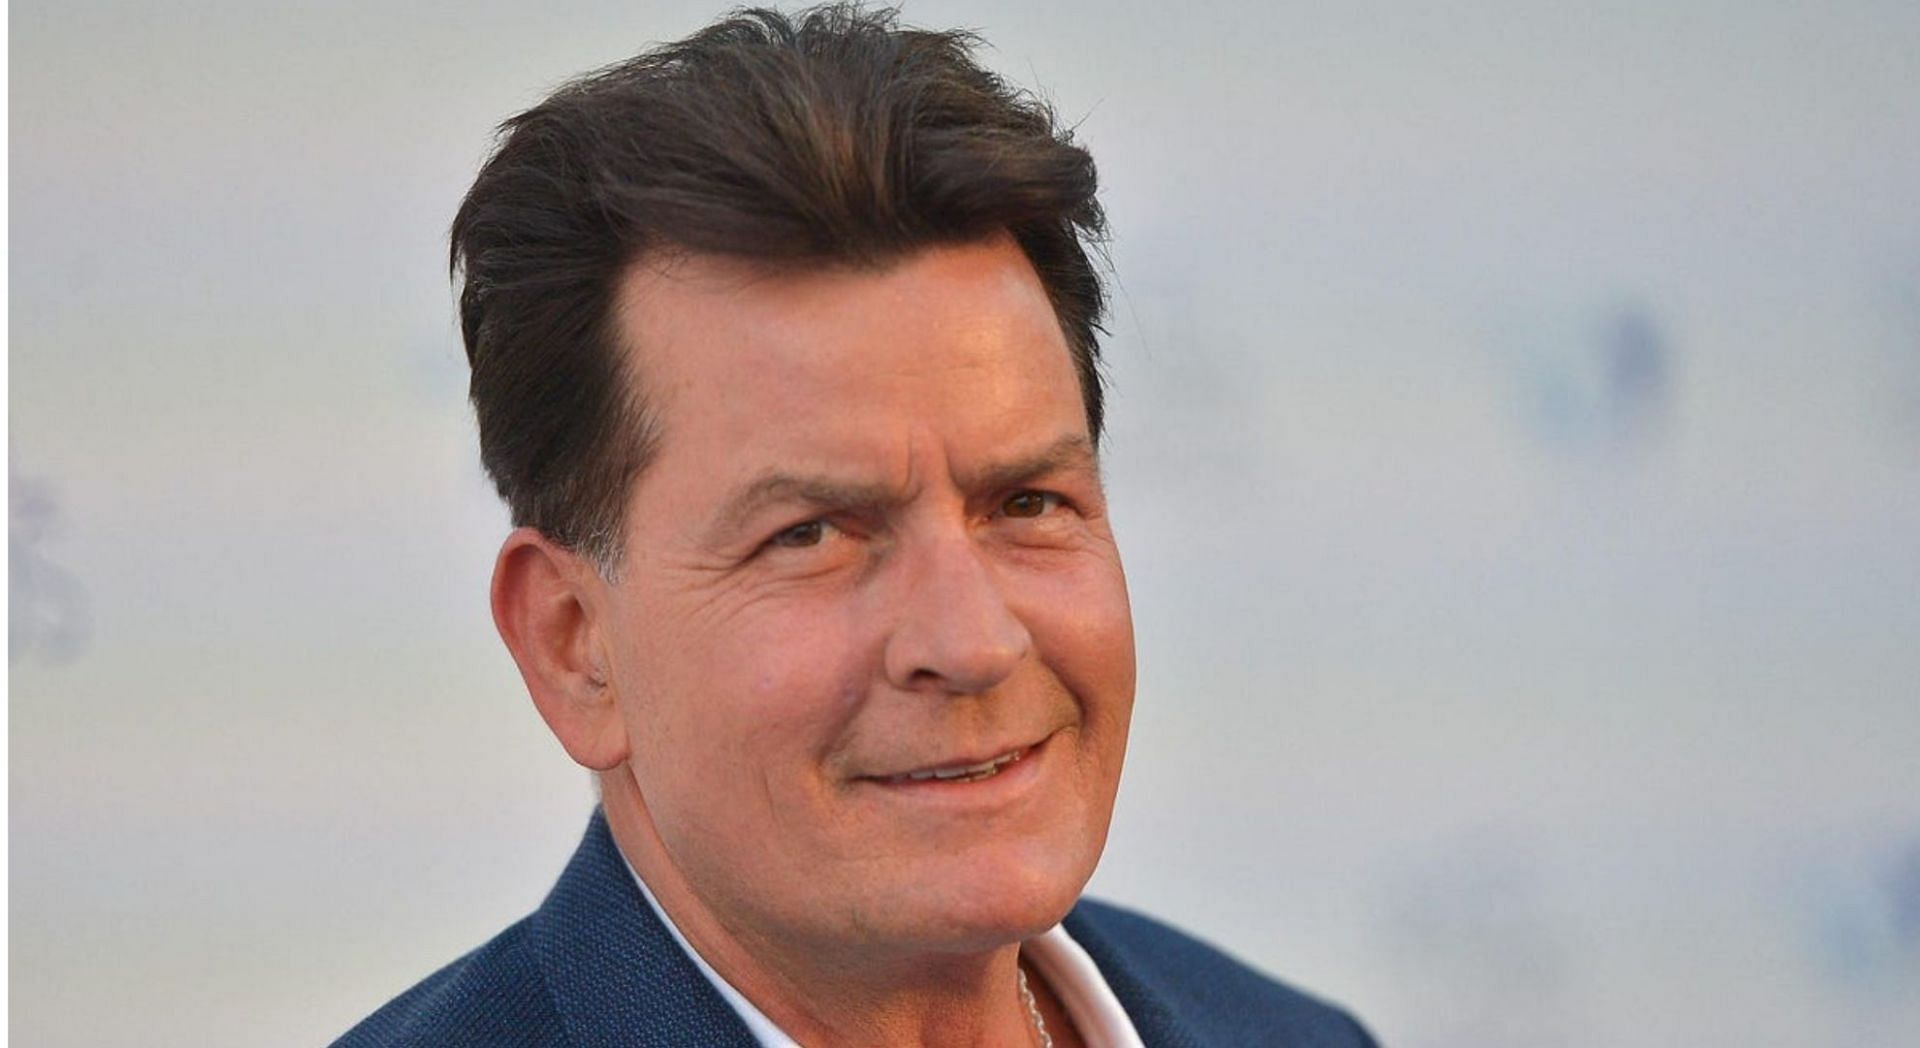 Charlie Sheen has agree to pay $120K to settle his 2017 lawsuit with former partner (Image via Getty Images)